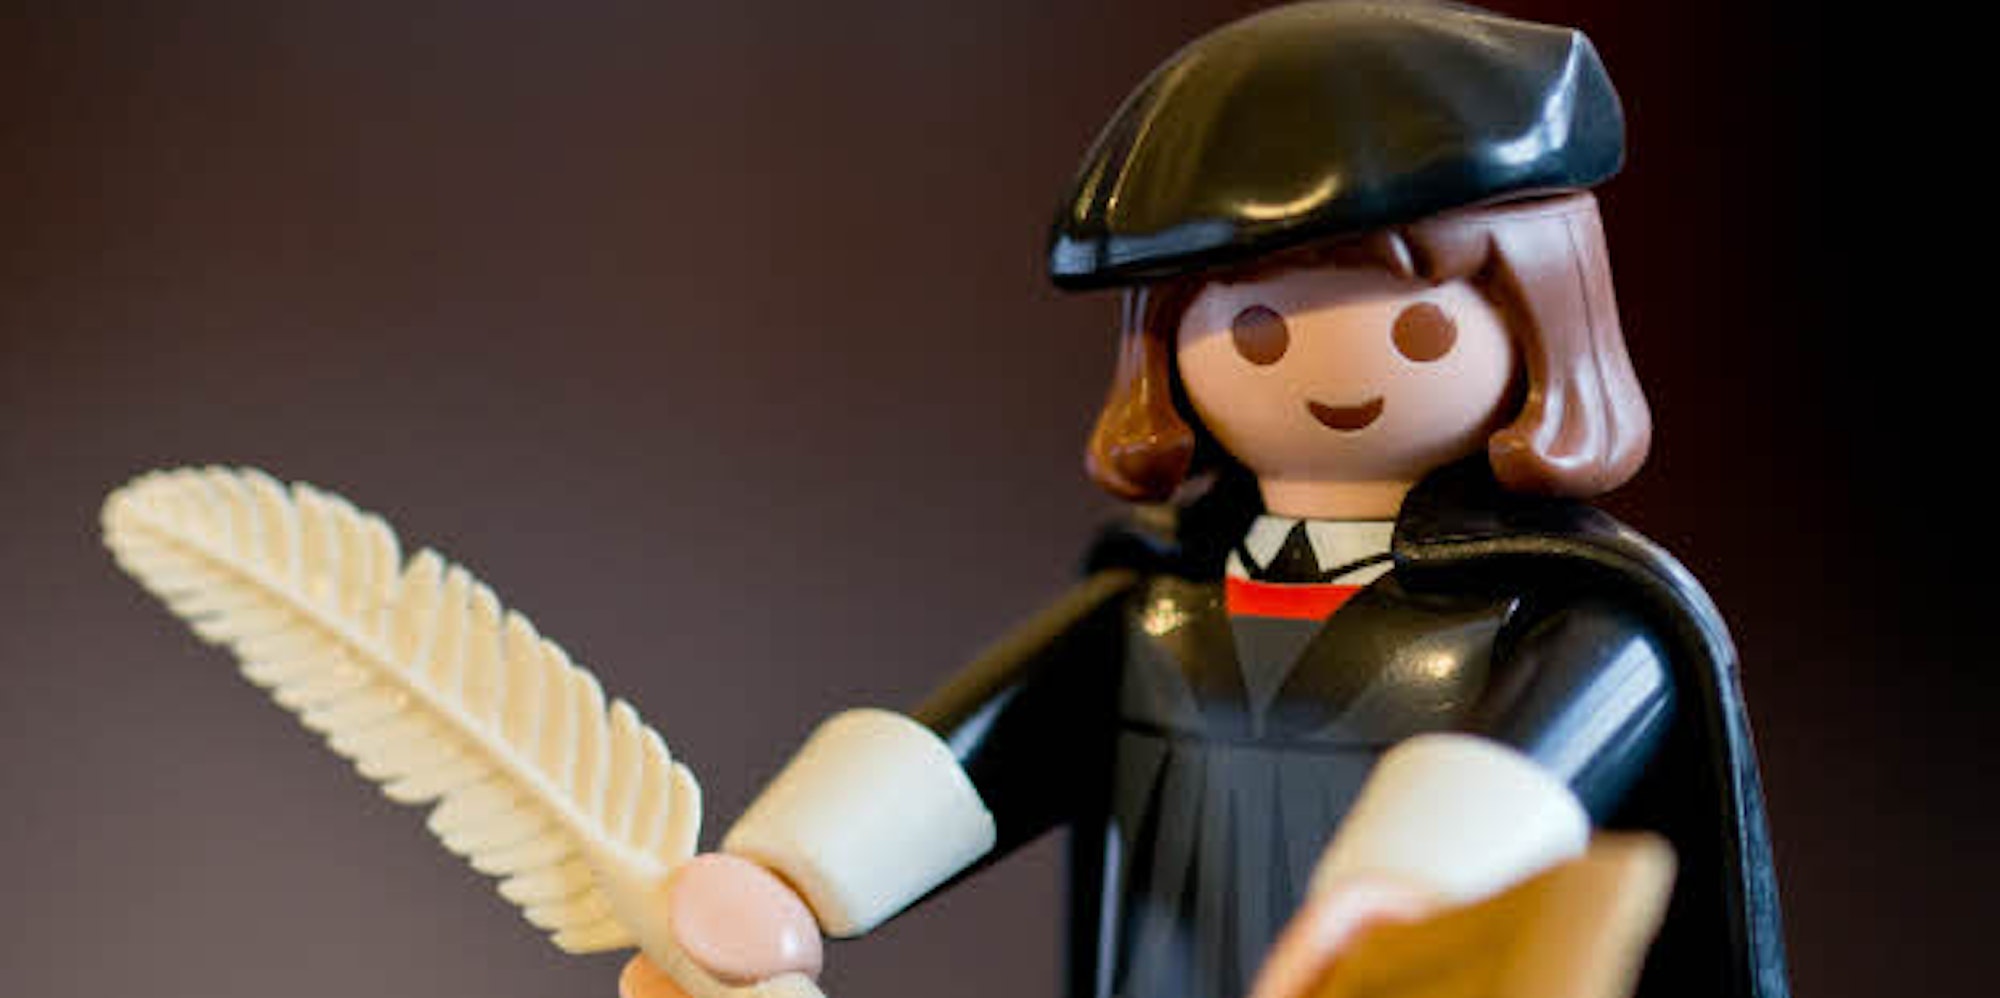 Luther als Playmobil-Figur